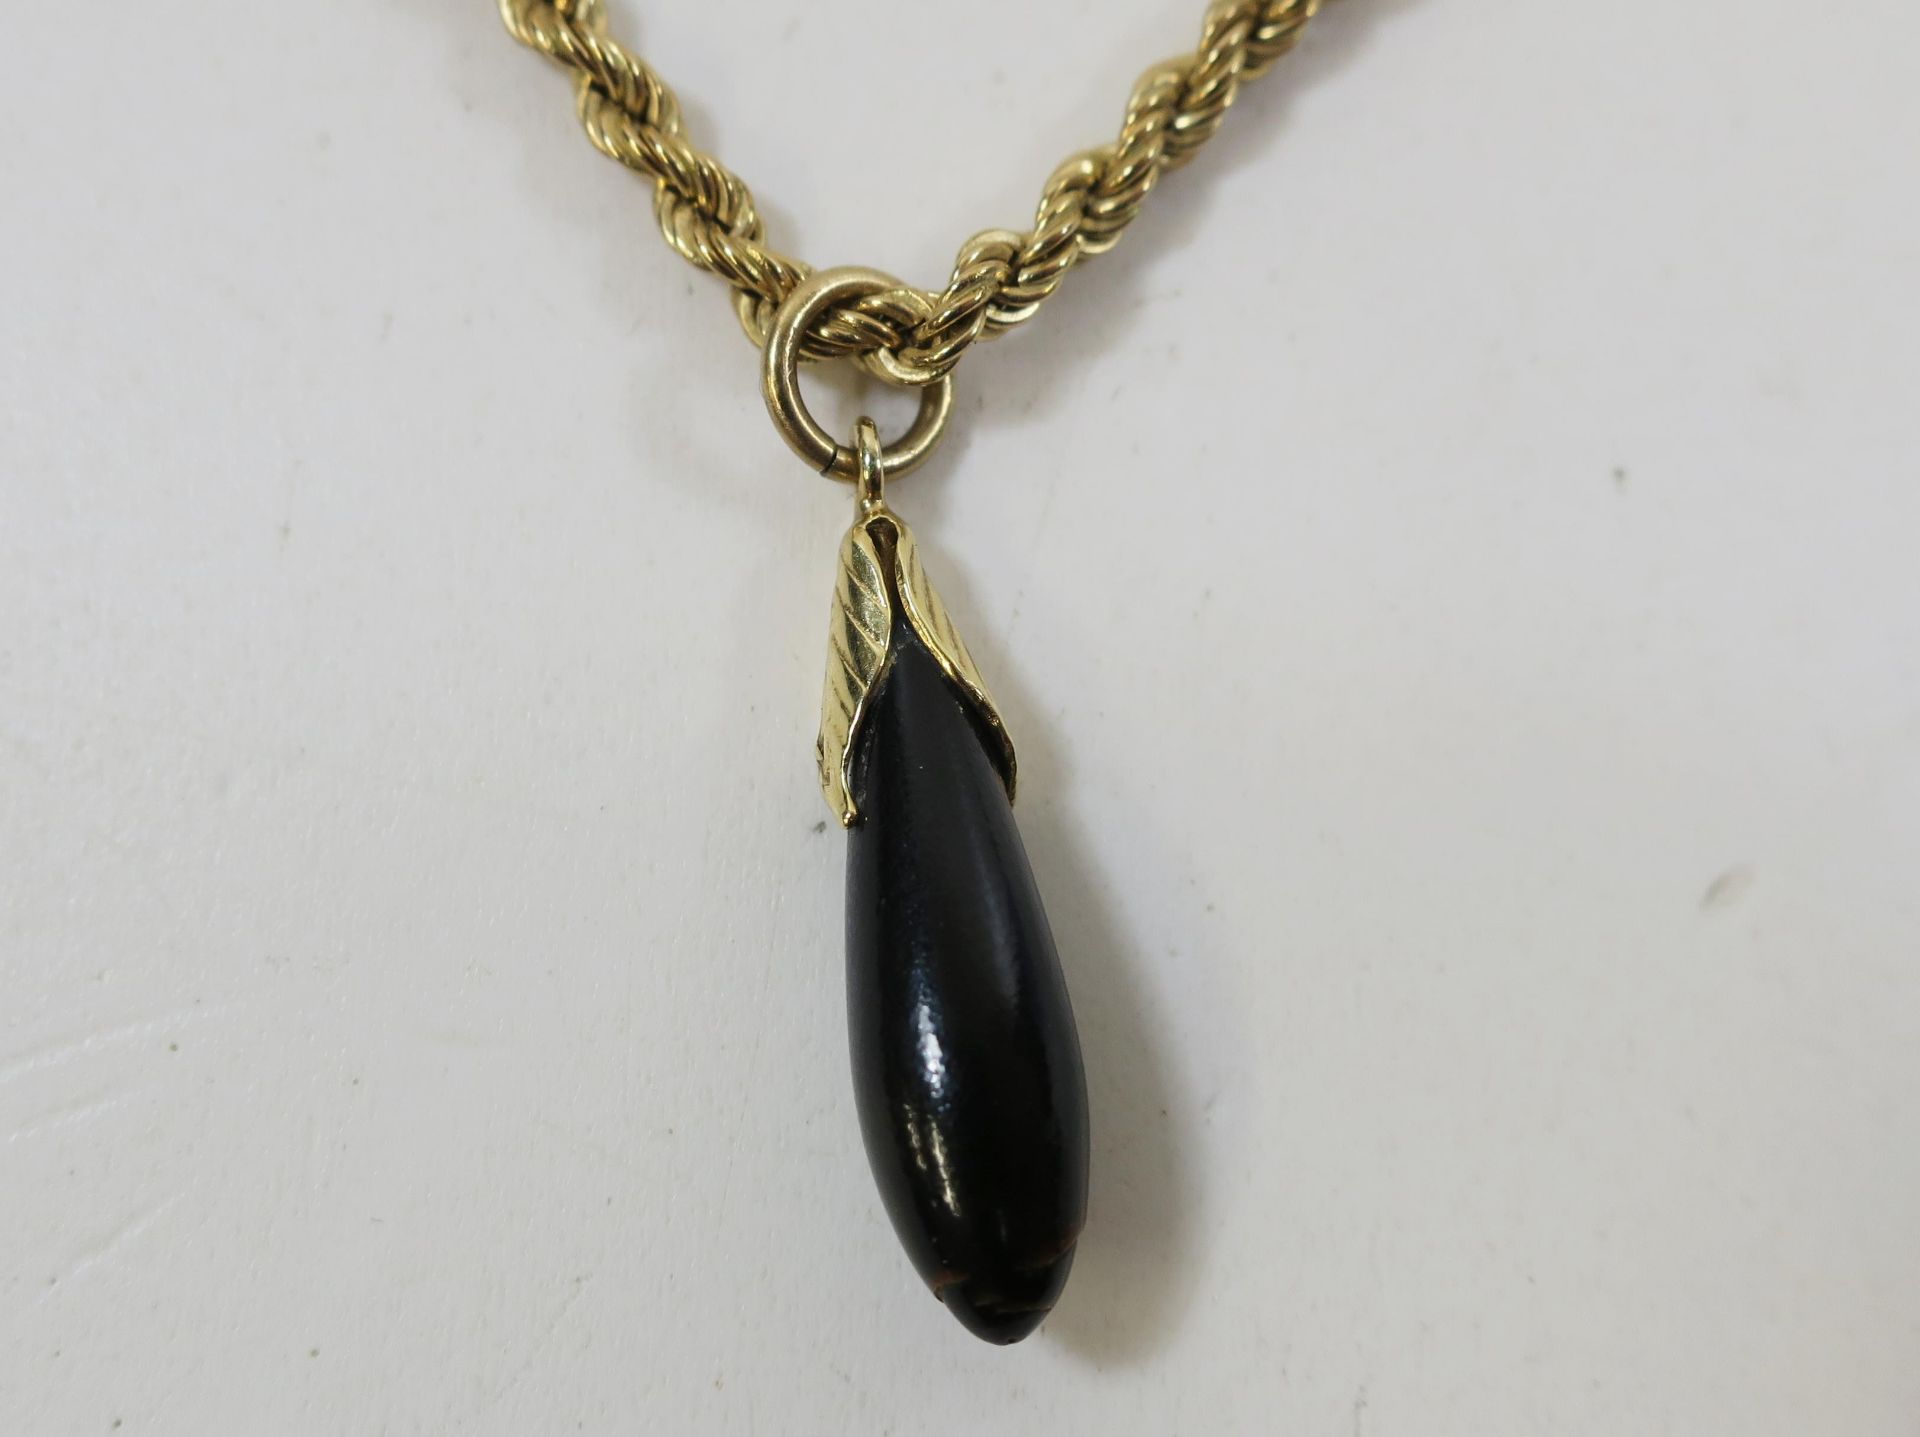 A 9ct Gold Rope Twist Chain (40cm long, 2.8gms) with a drop pendant in the form of a fruit with Gold - Image 3 of 5